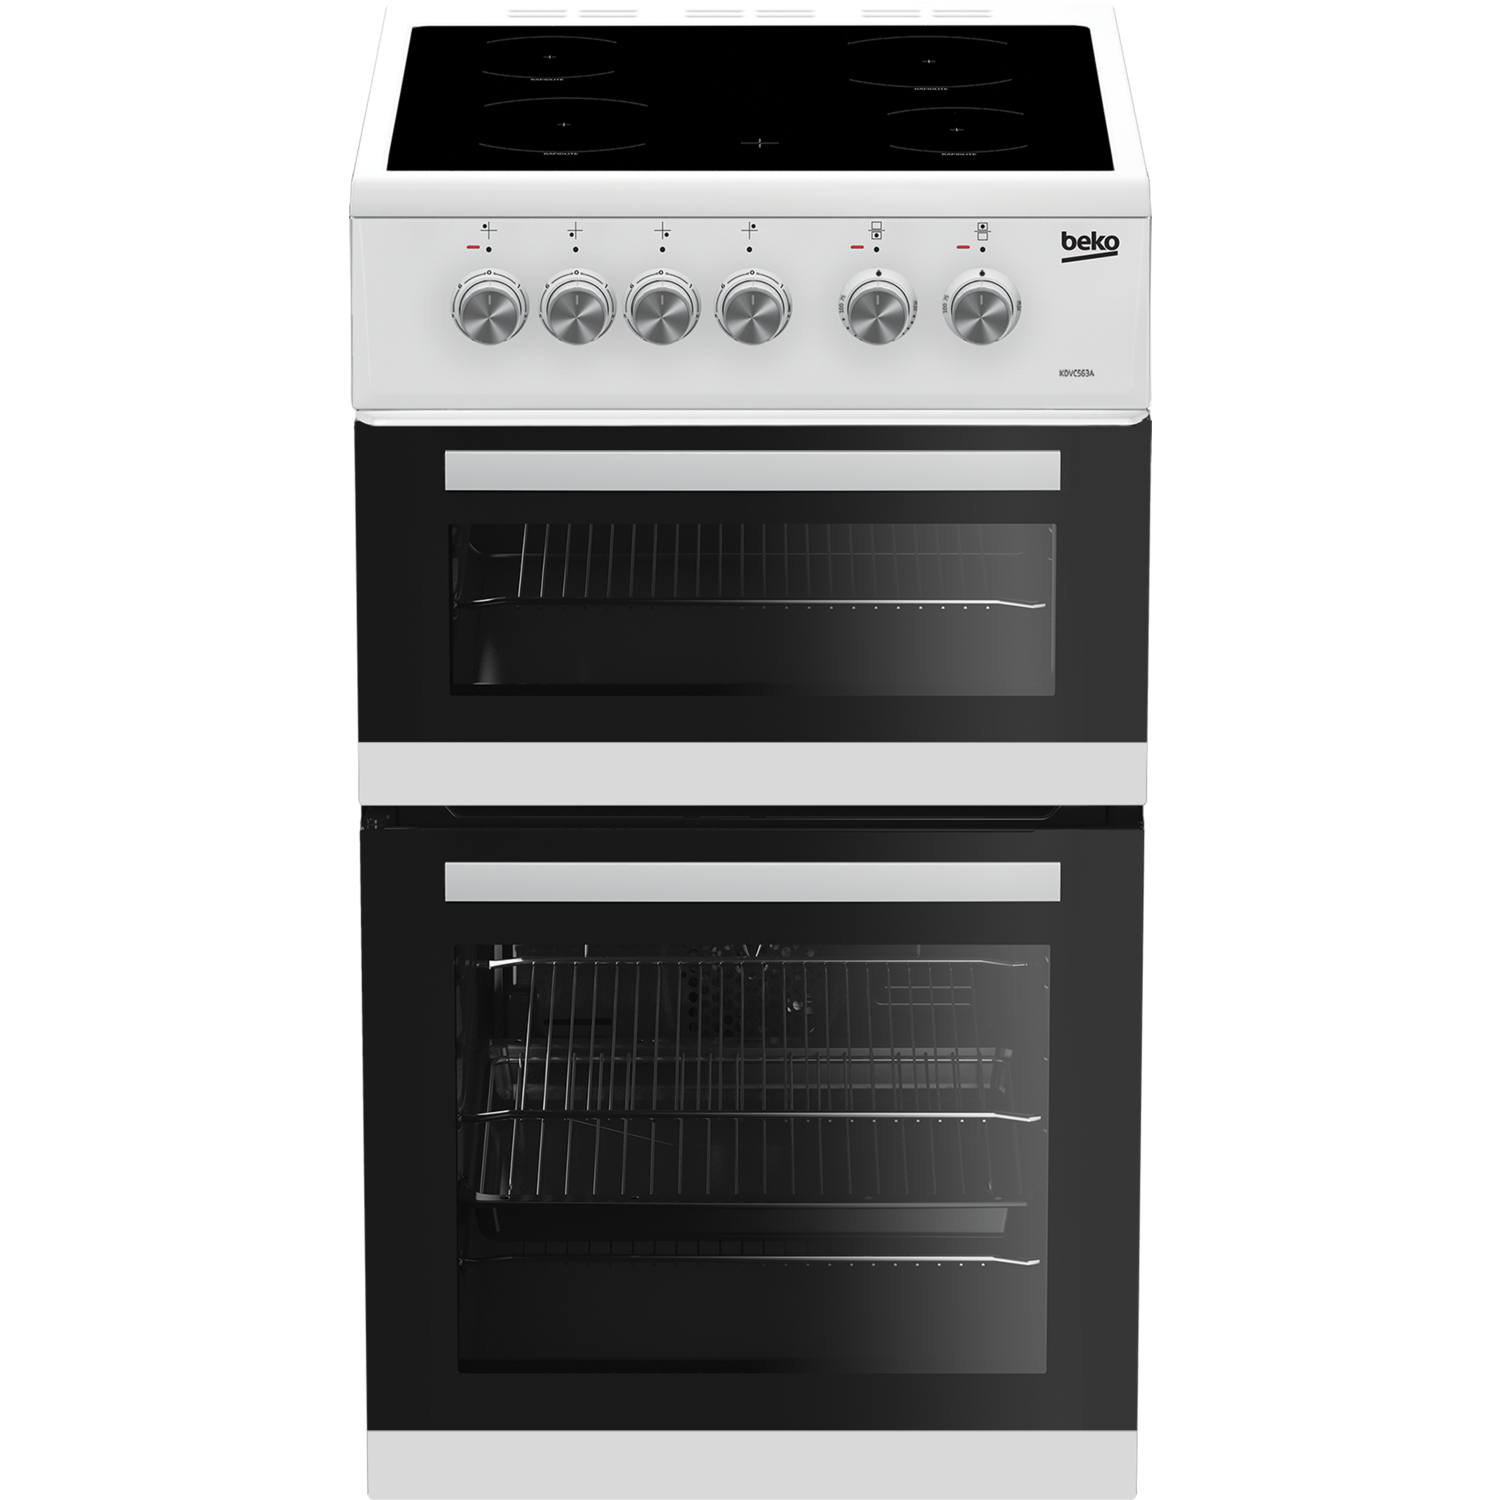 Beko KDVC563AW 50cm Electric Cooker with Ceramic Hob - White - A/A Rated